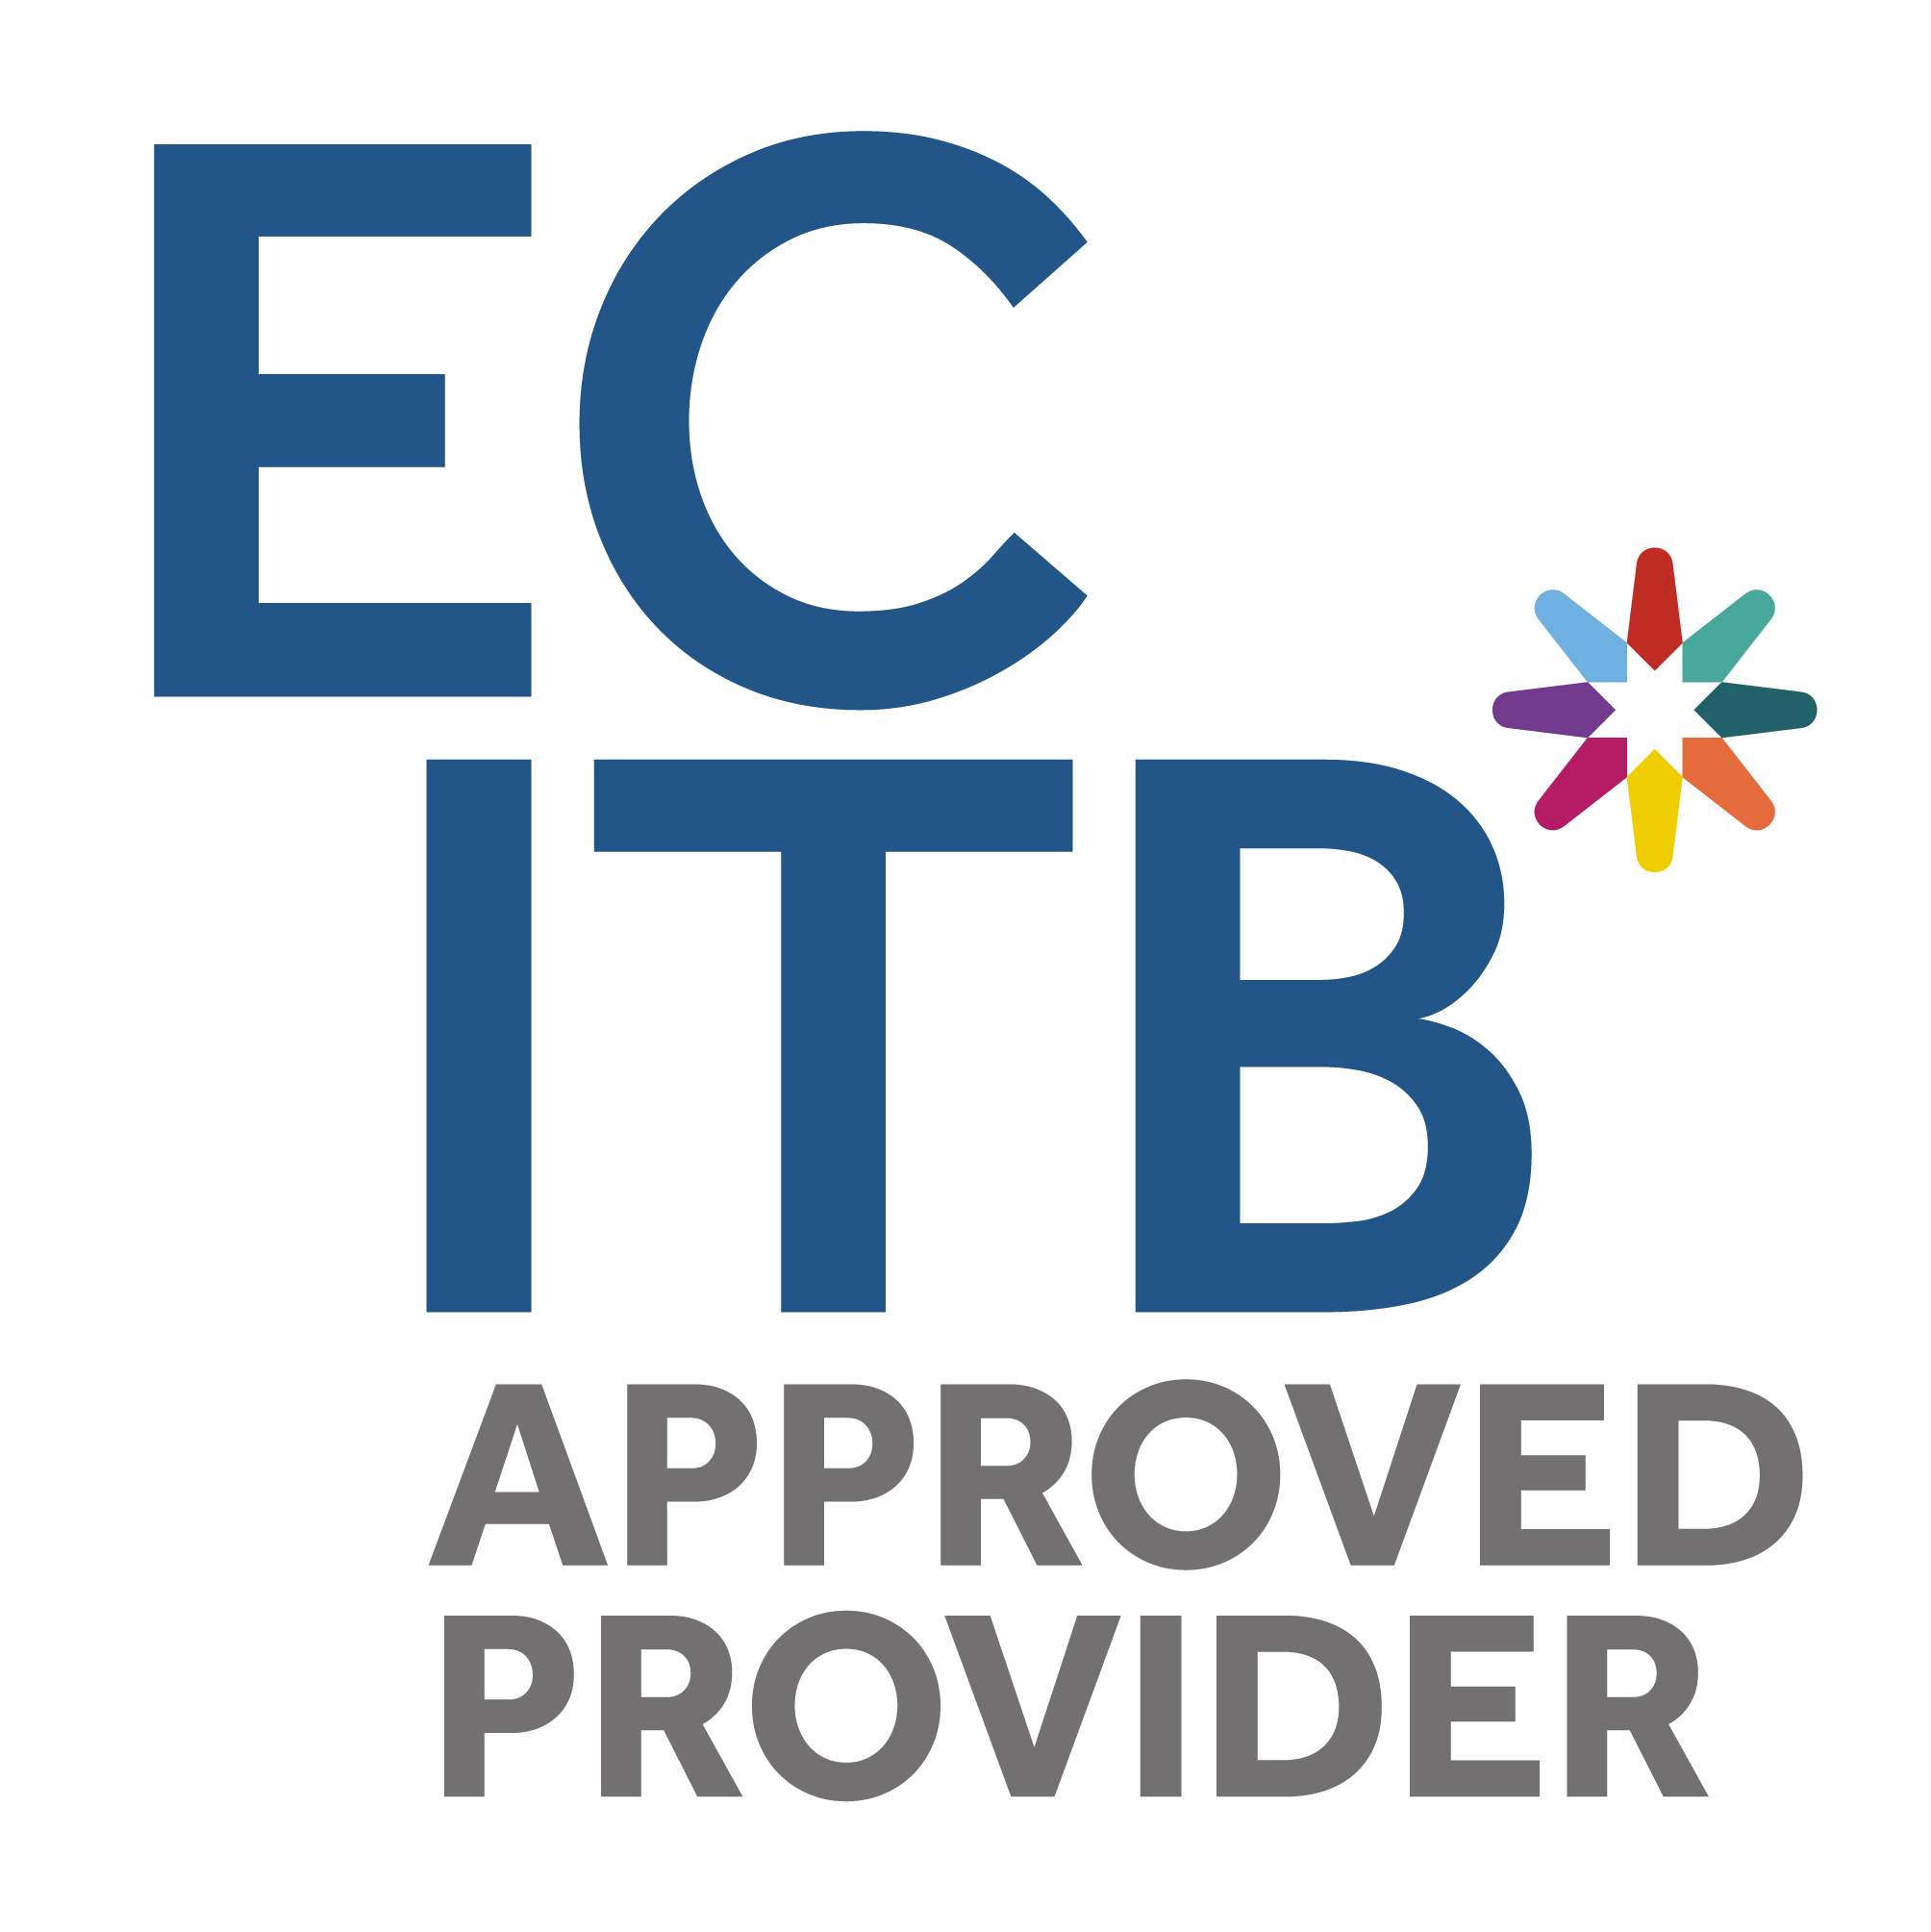 Approved Provider Logos 01